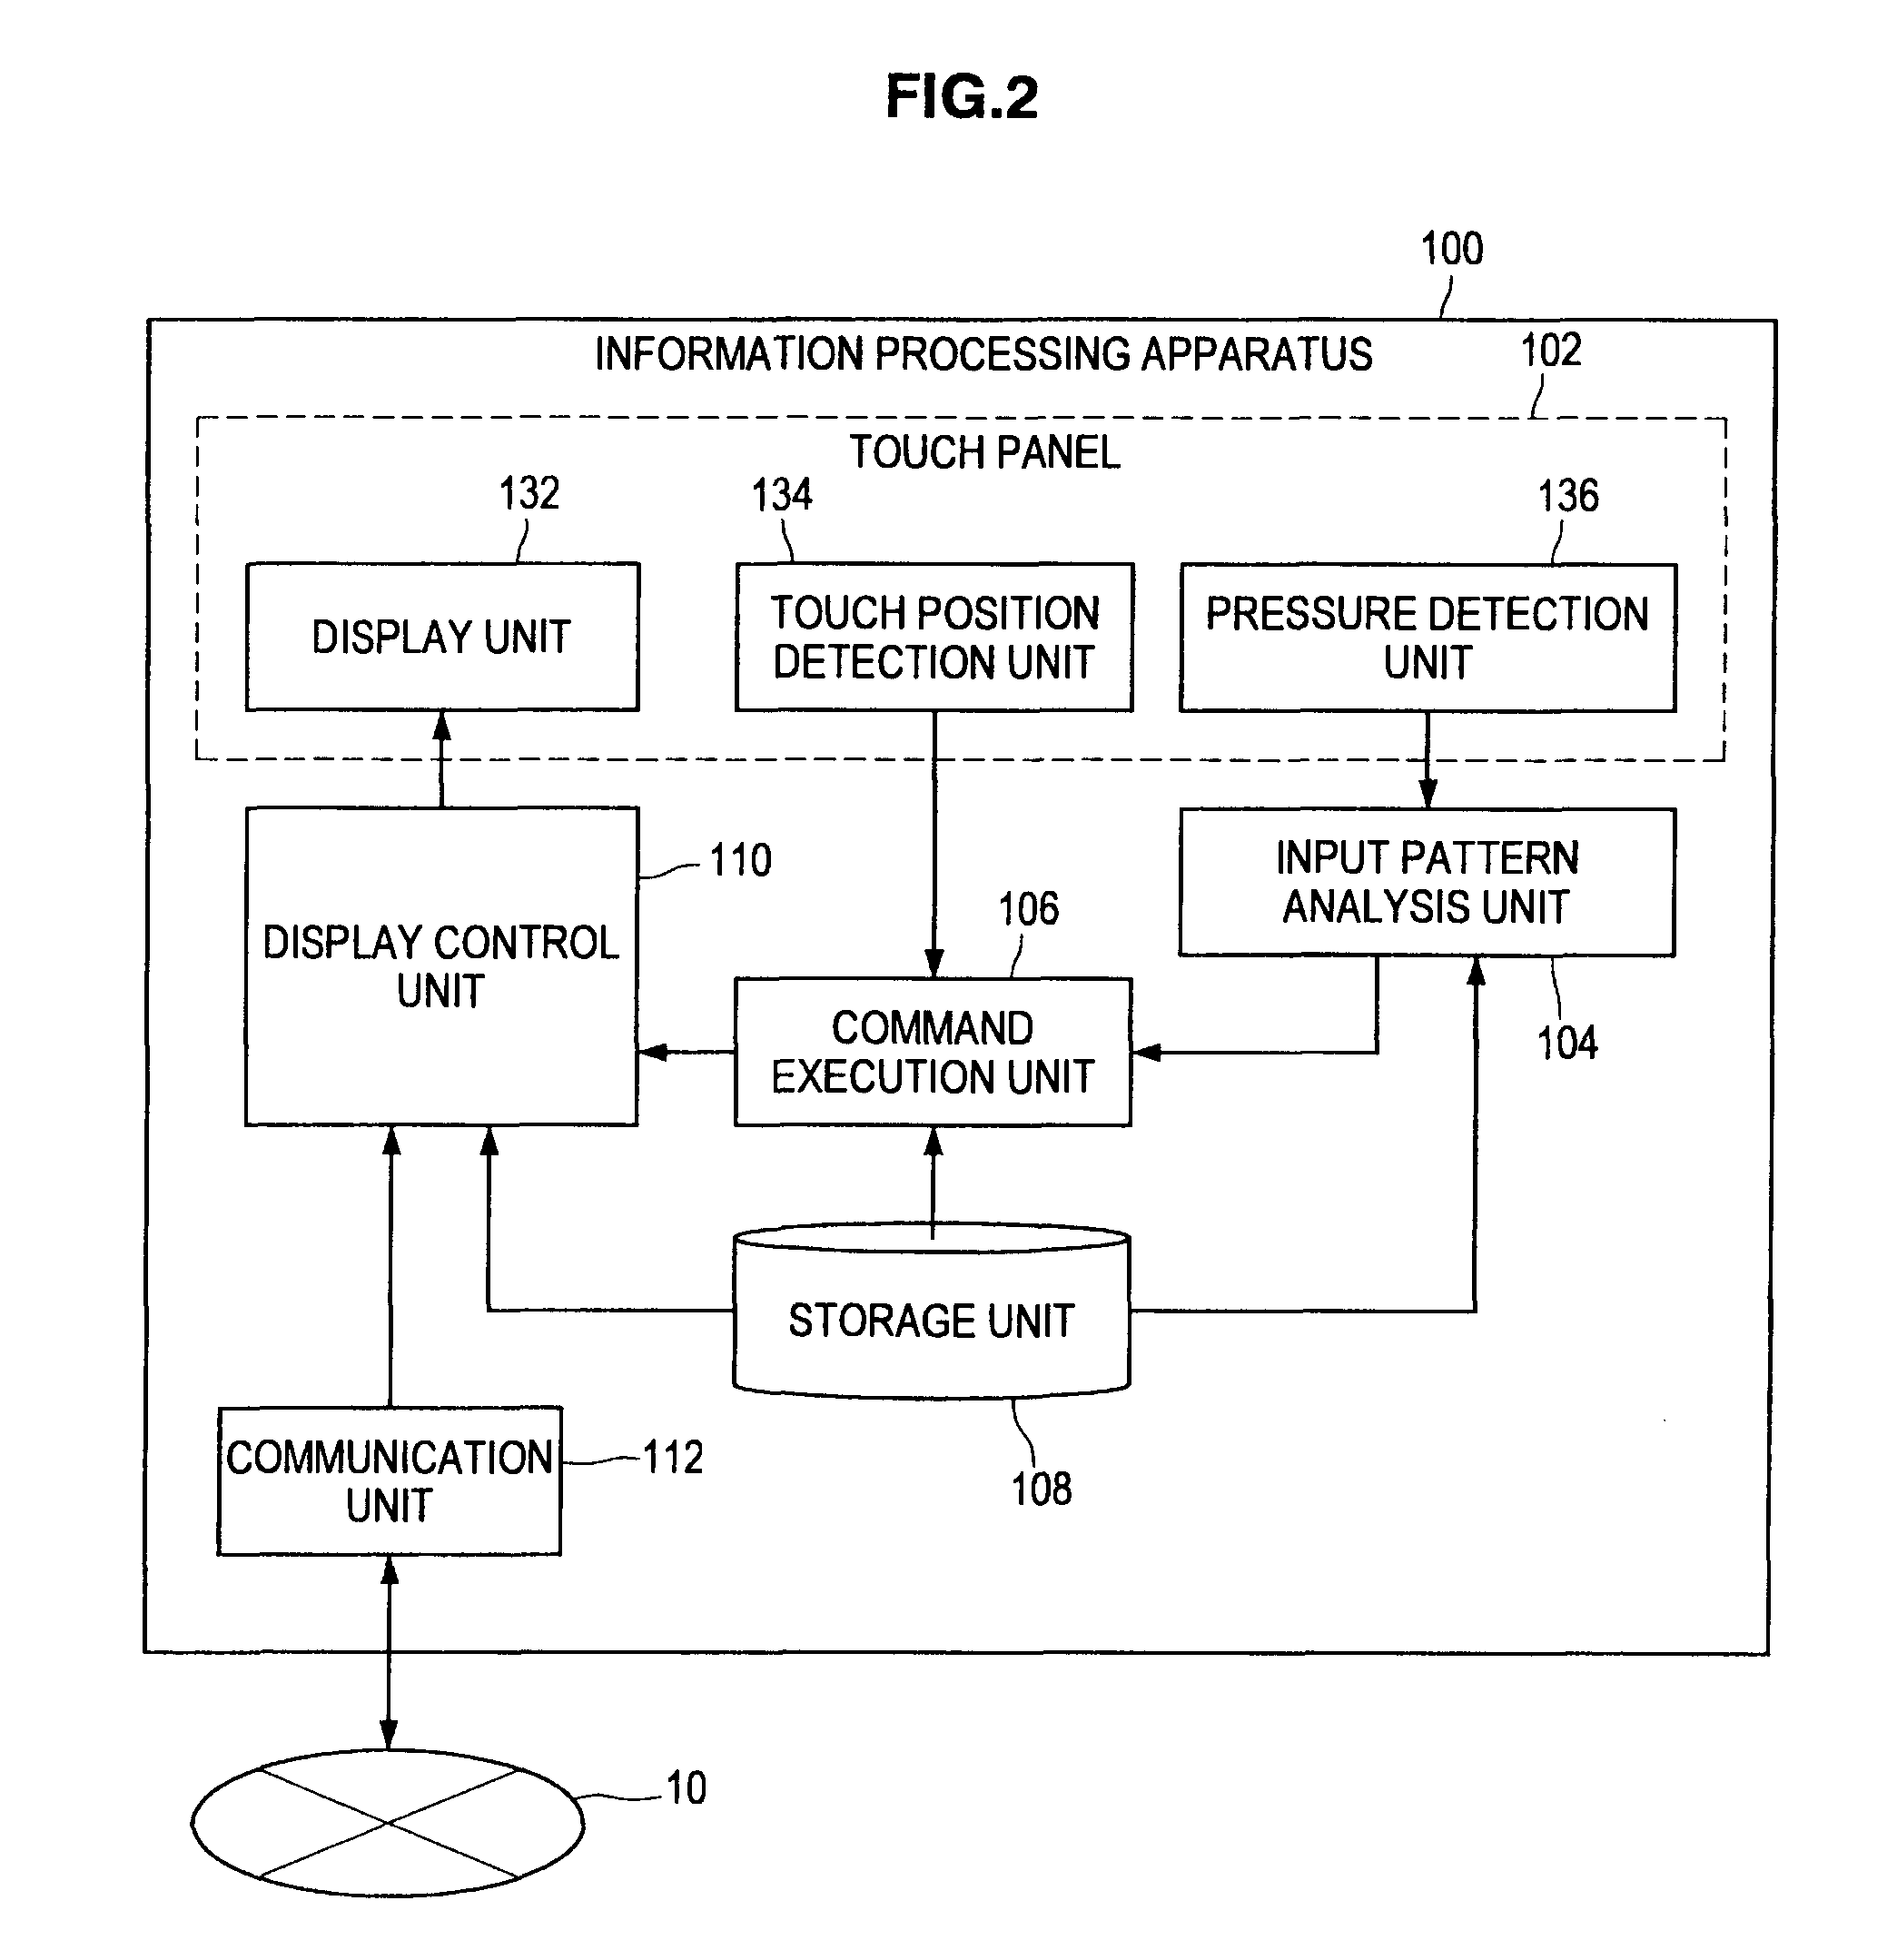 Information processing apparatus, information processing method, and program for providing specific function based on rate of change of touch pressure intensity